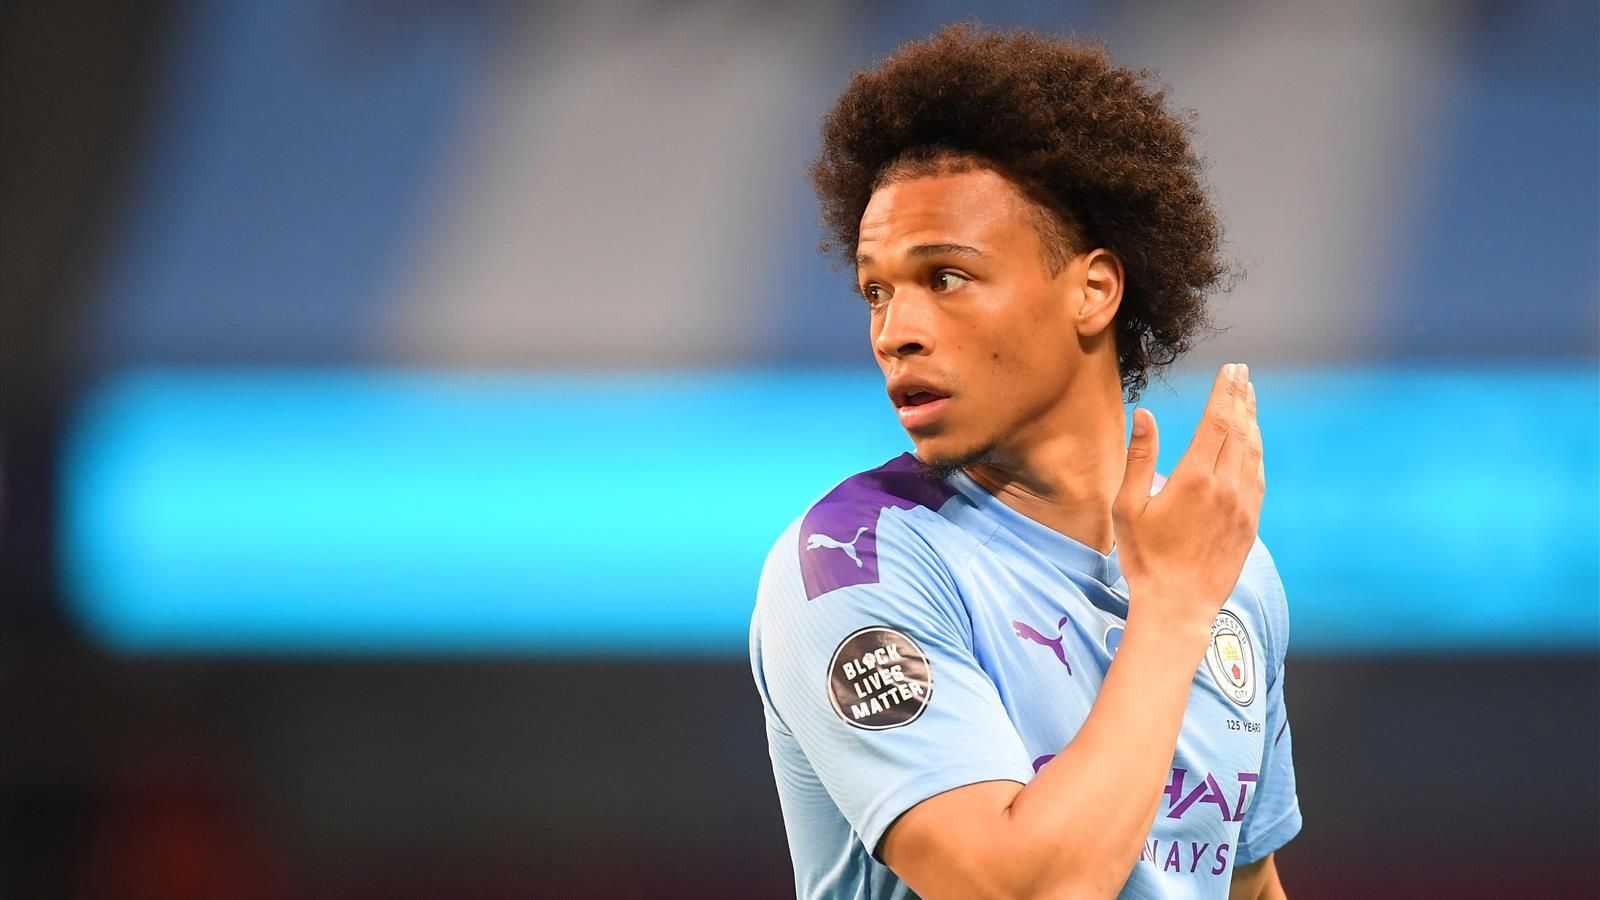 Leroy Sane will not play for City again